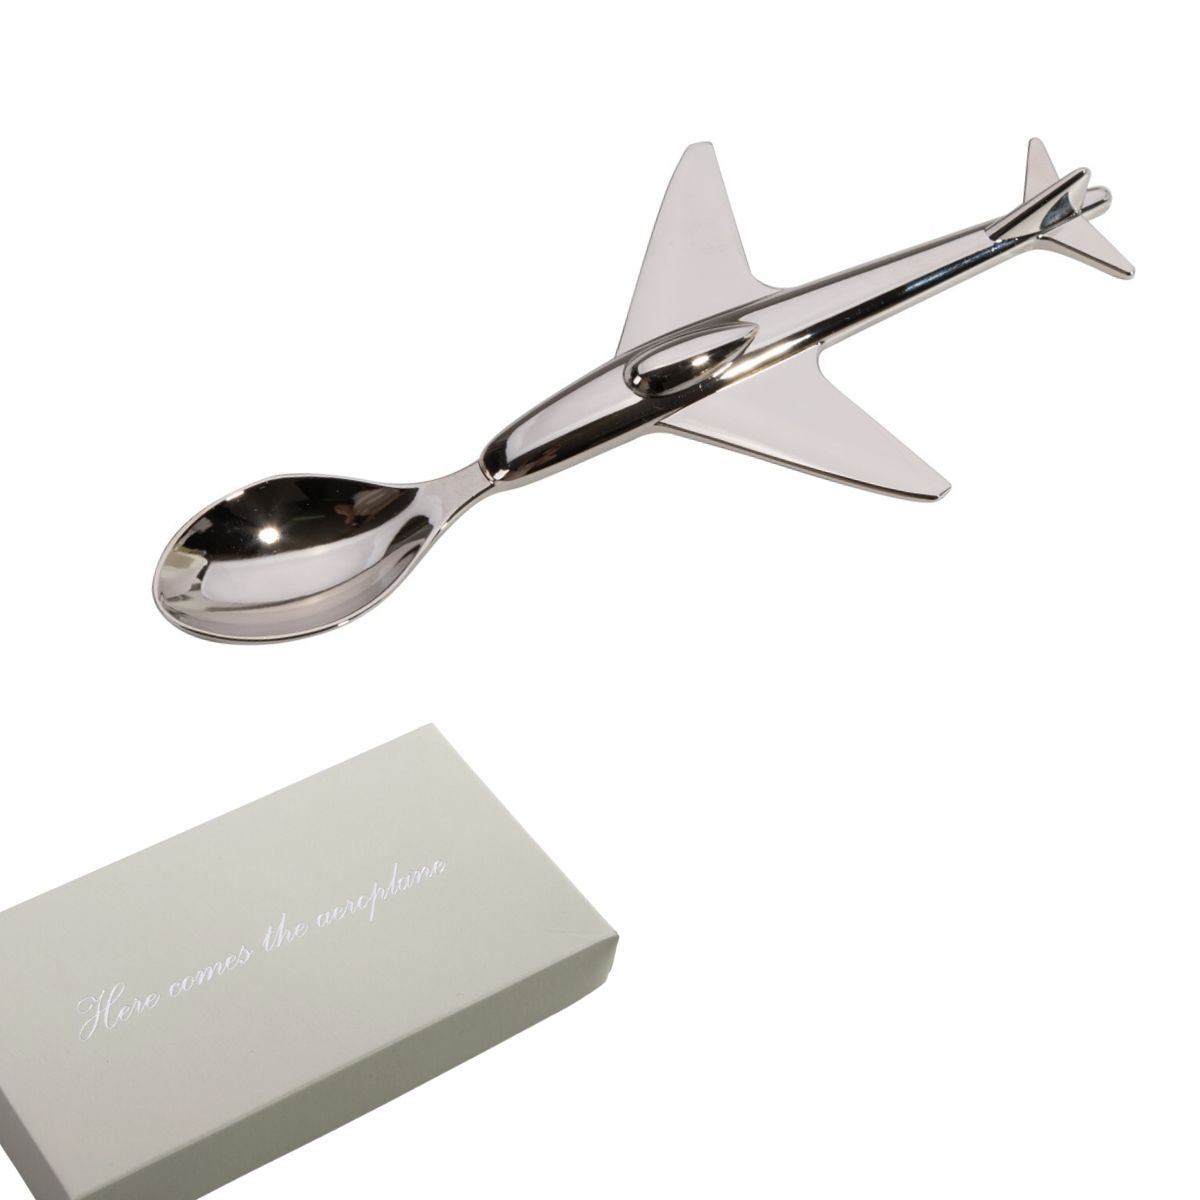 'Here comes the Airplane' Spoon